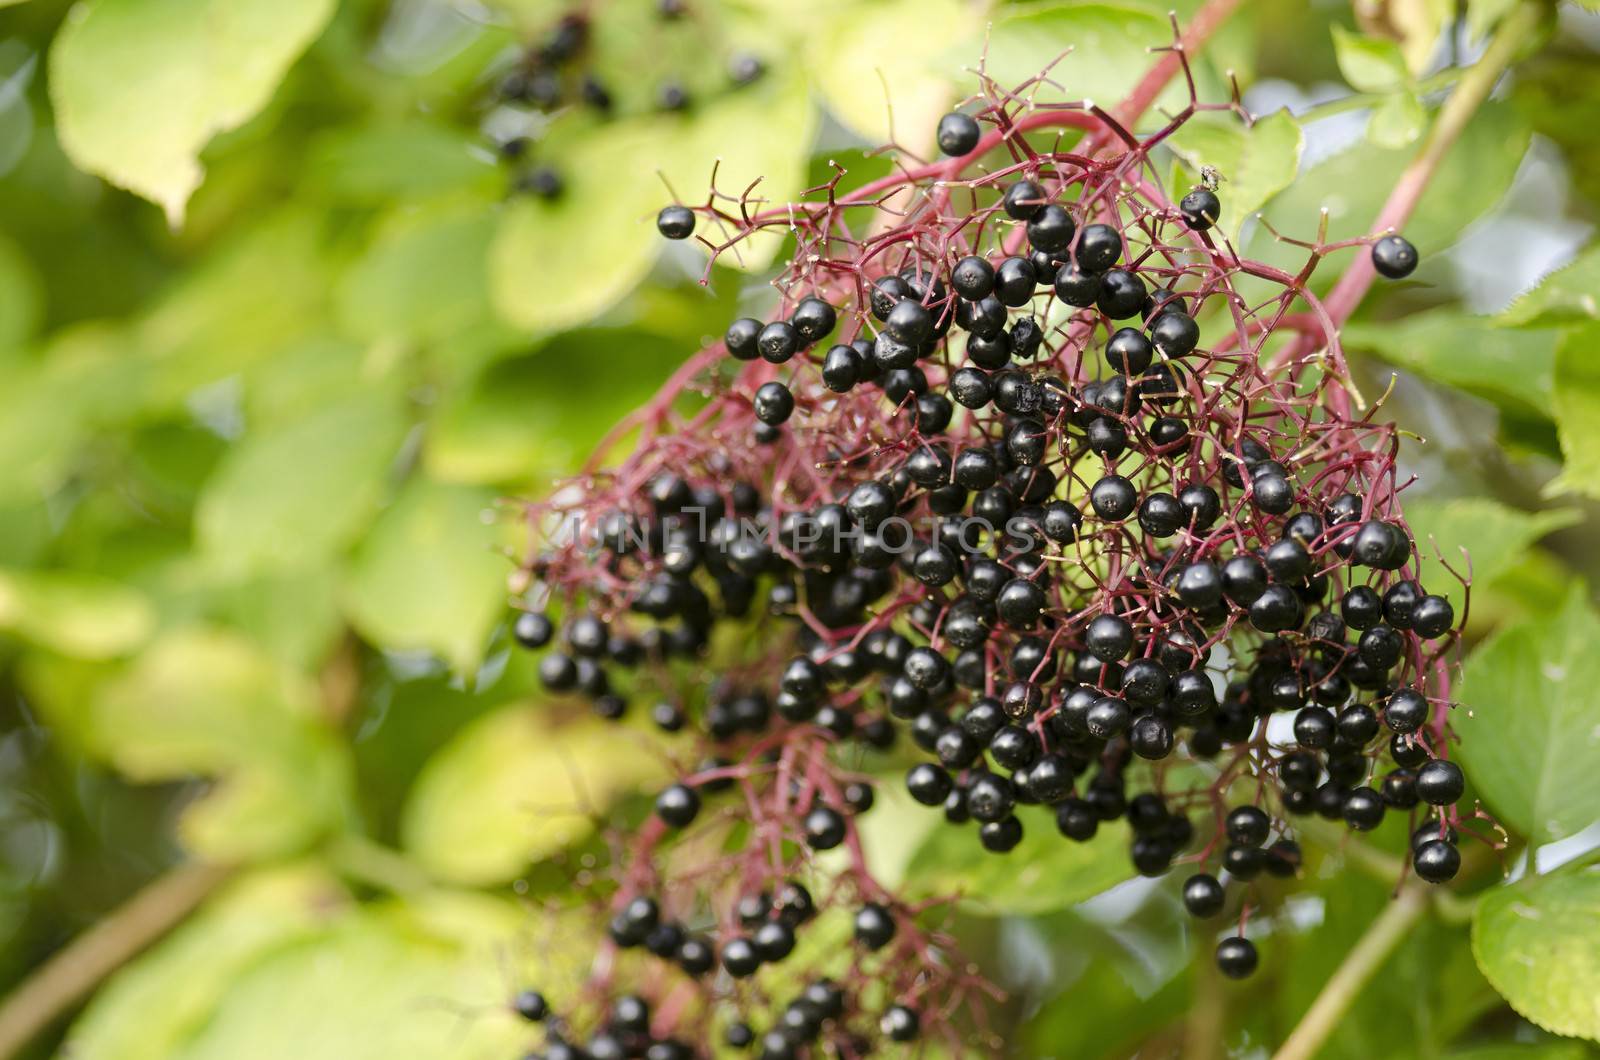 Twig of elderberry with ripe fruits by Arrxxx